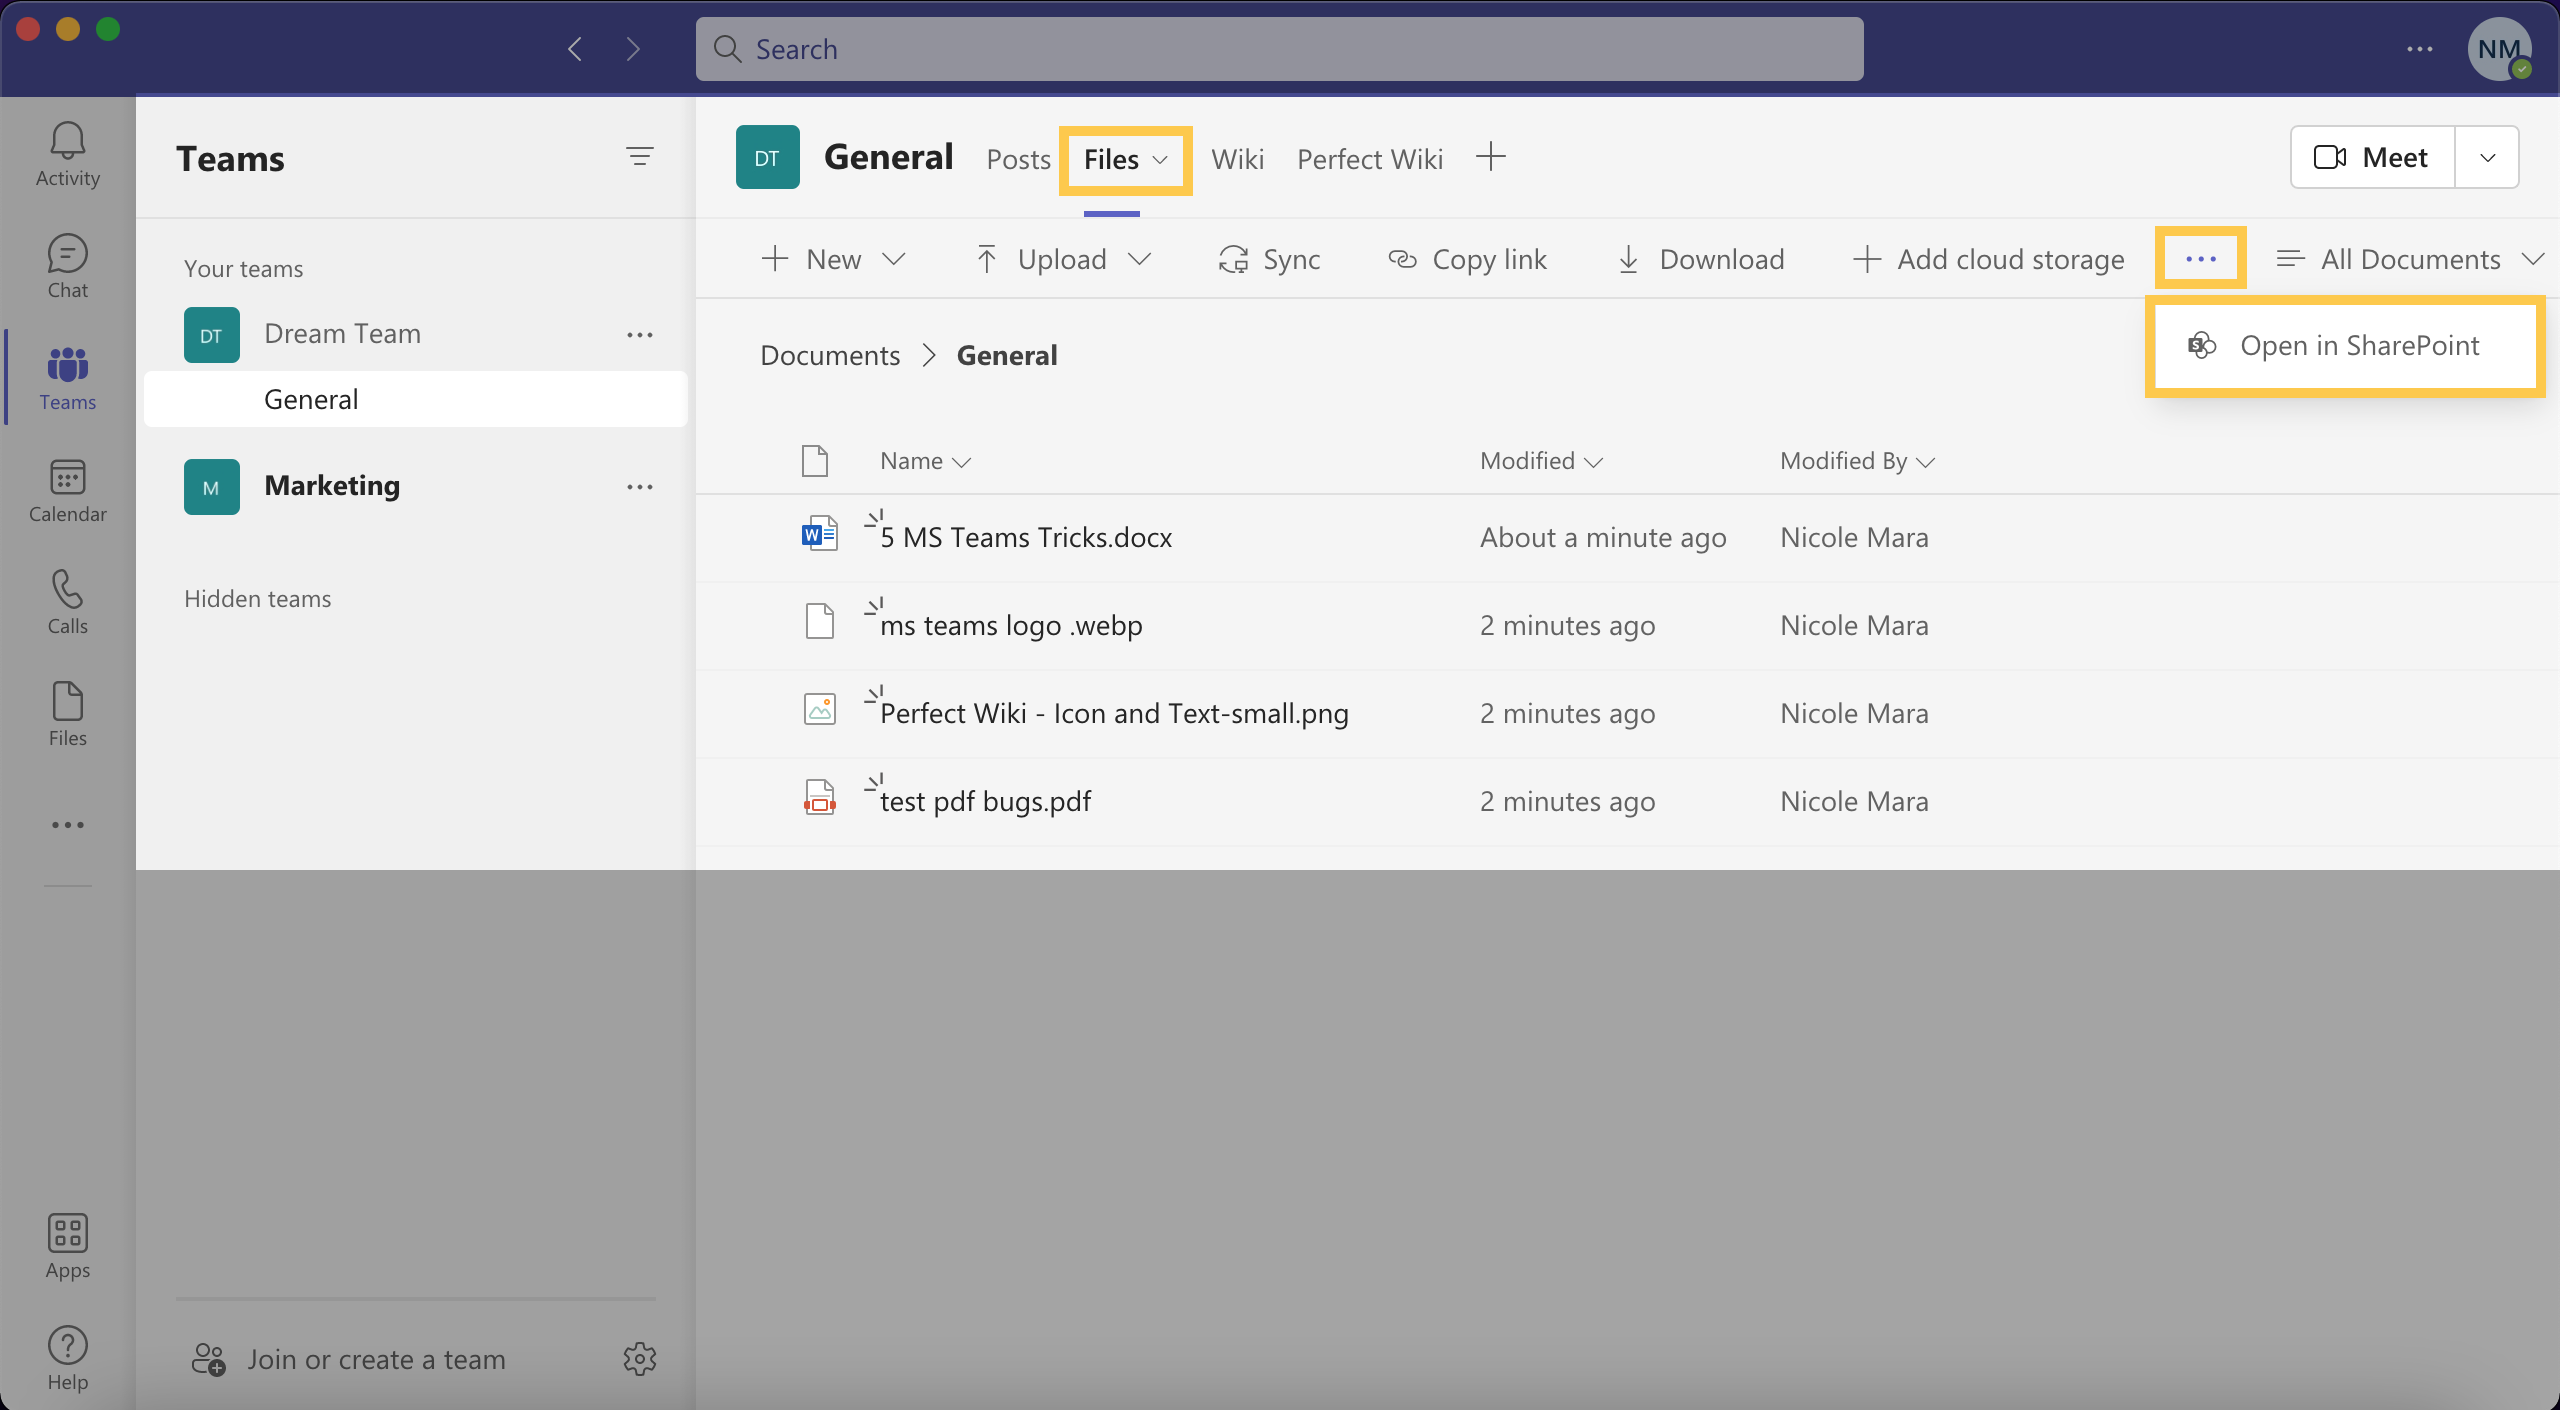 Guide How to Search Through Microsoft Teams Built-In Wiki